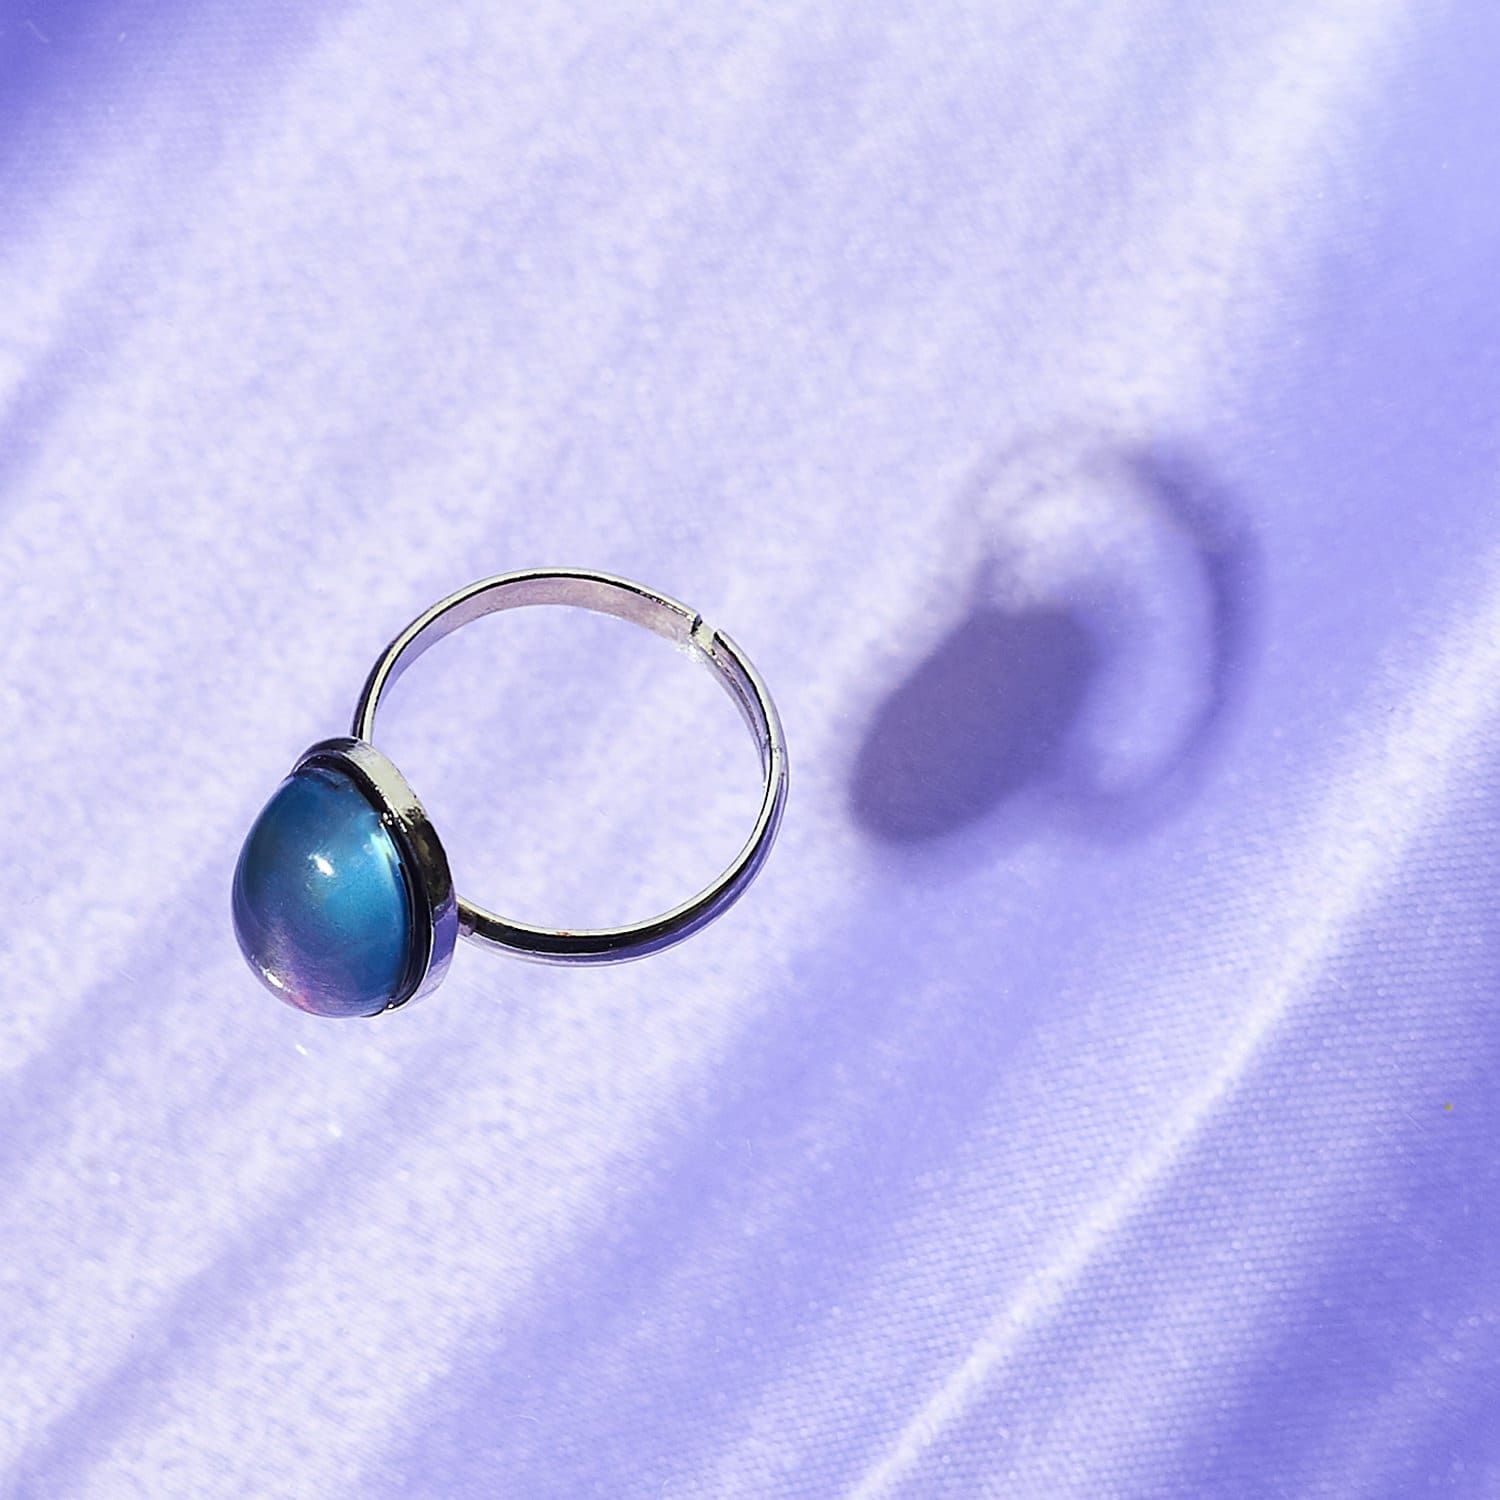 Oval Mood Ring 90s - Baby - back to School - Bff - Mood Ring